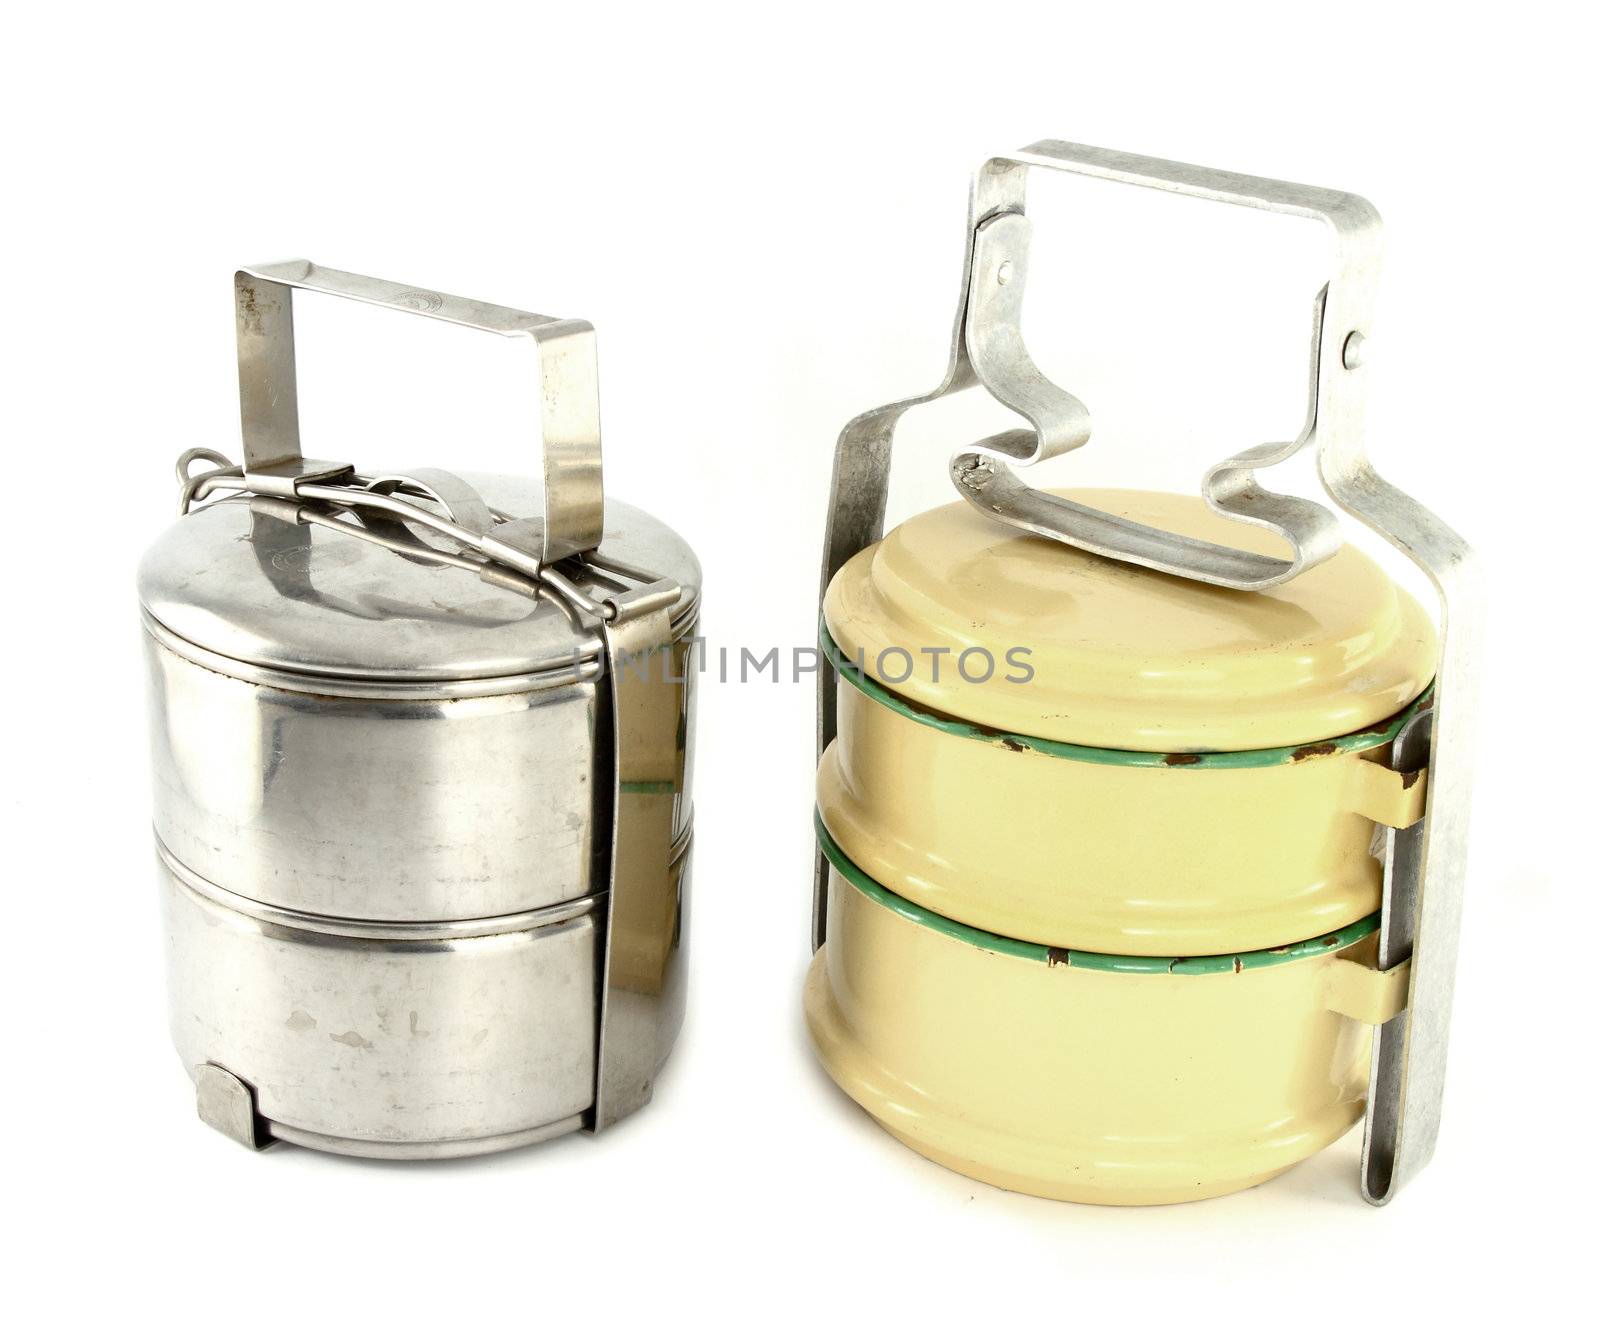 Metal and silver tiffin, food container on white background